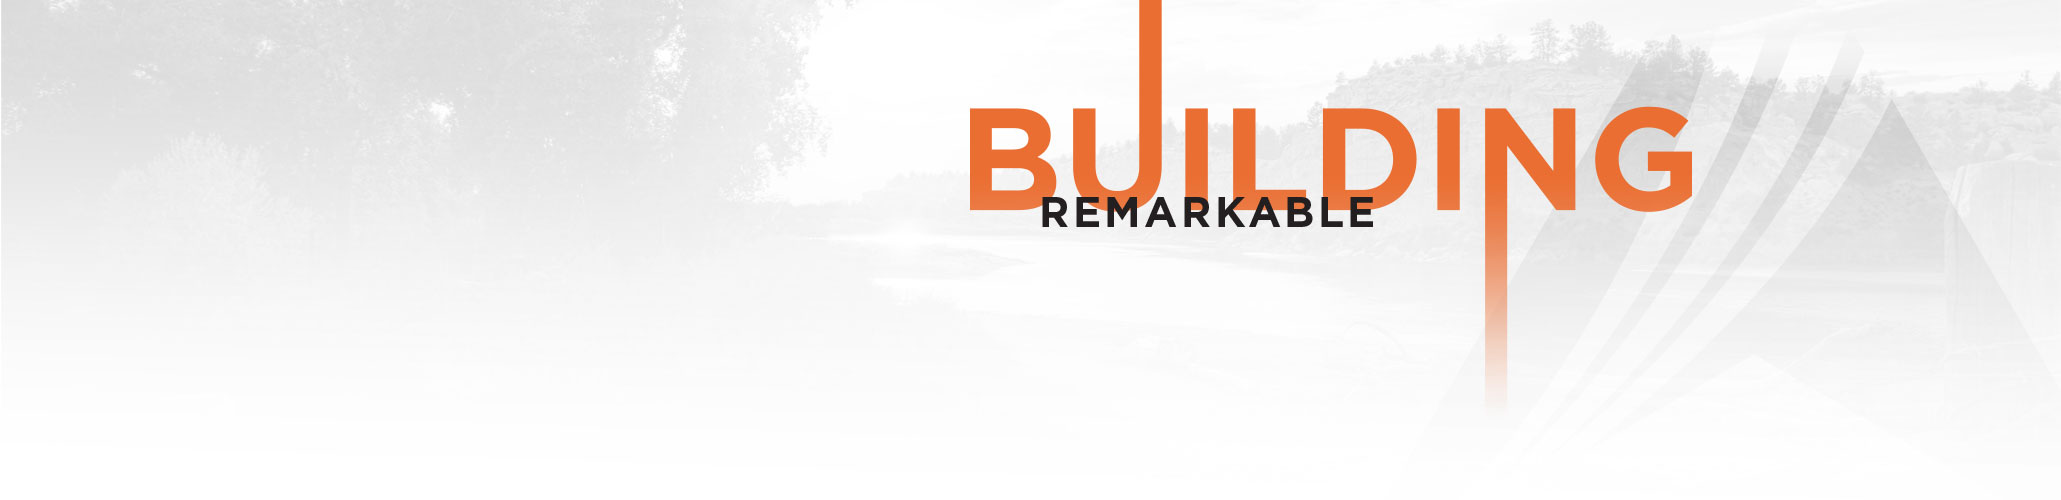 Building Remarkable on Community7 Television